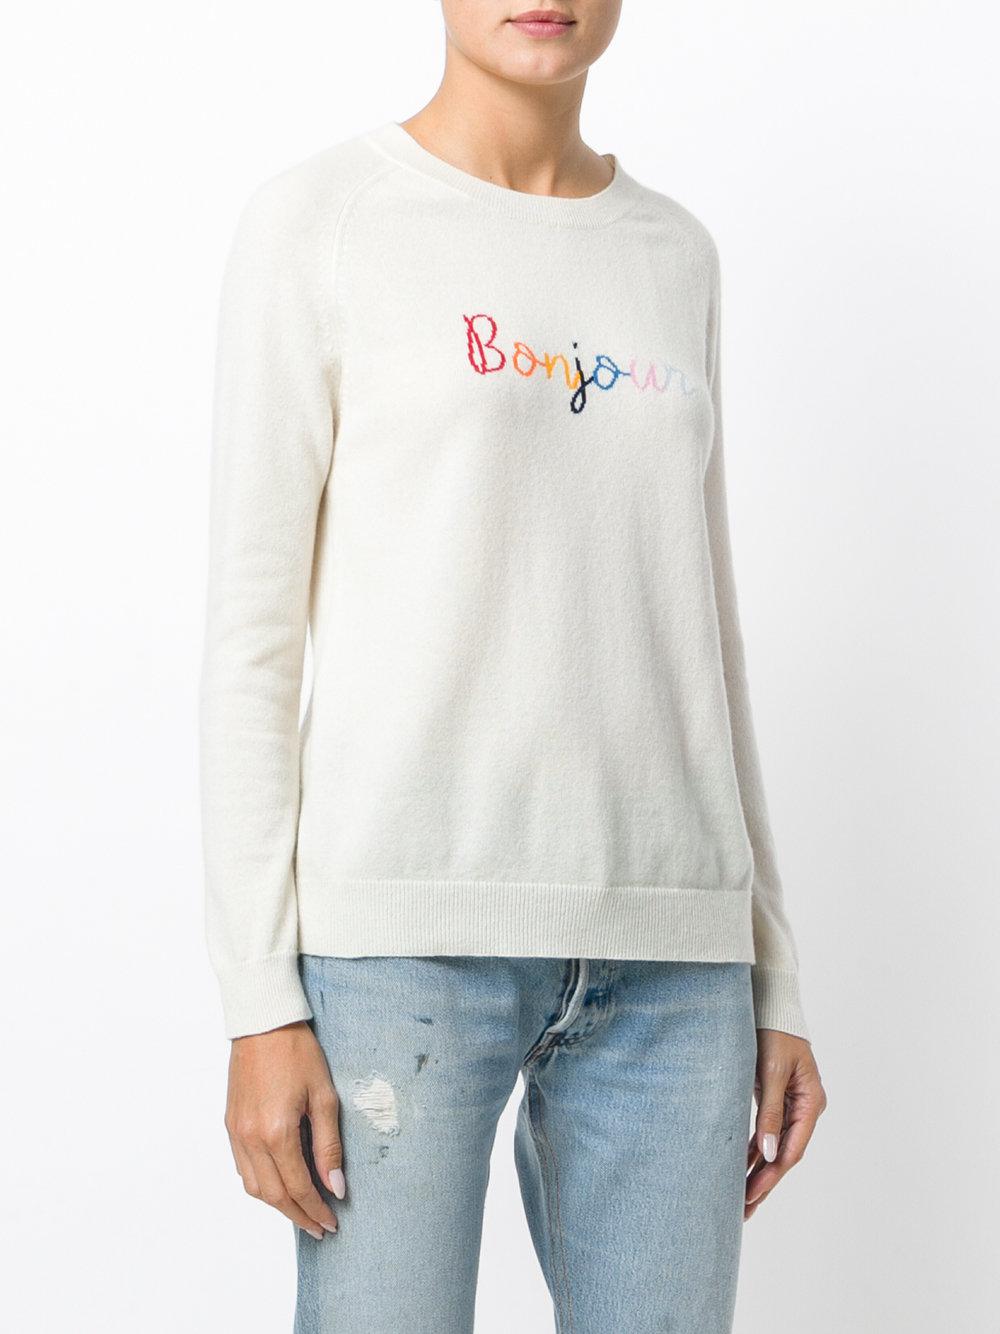 Chinti & Parker Cashmere Bonjour Jumper in White - Lyst